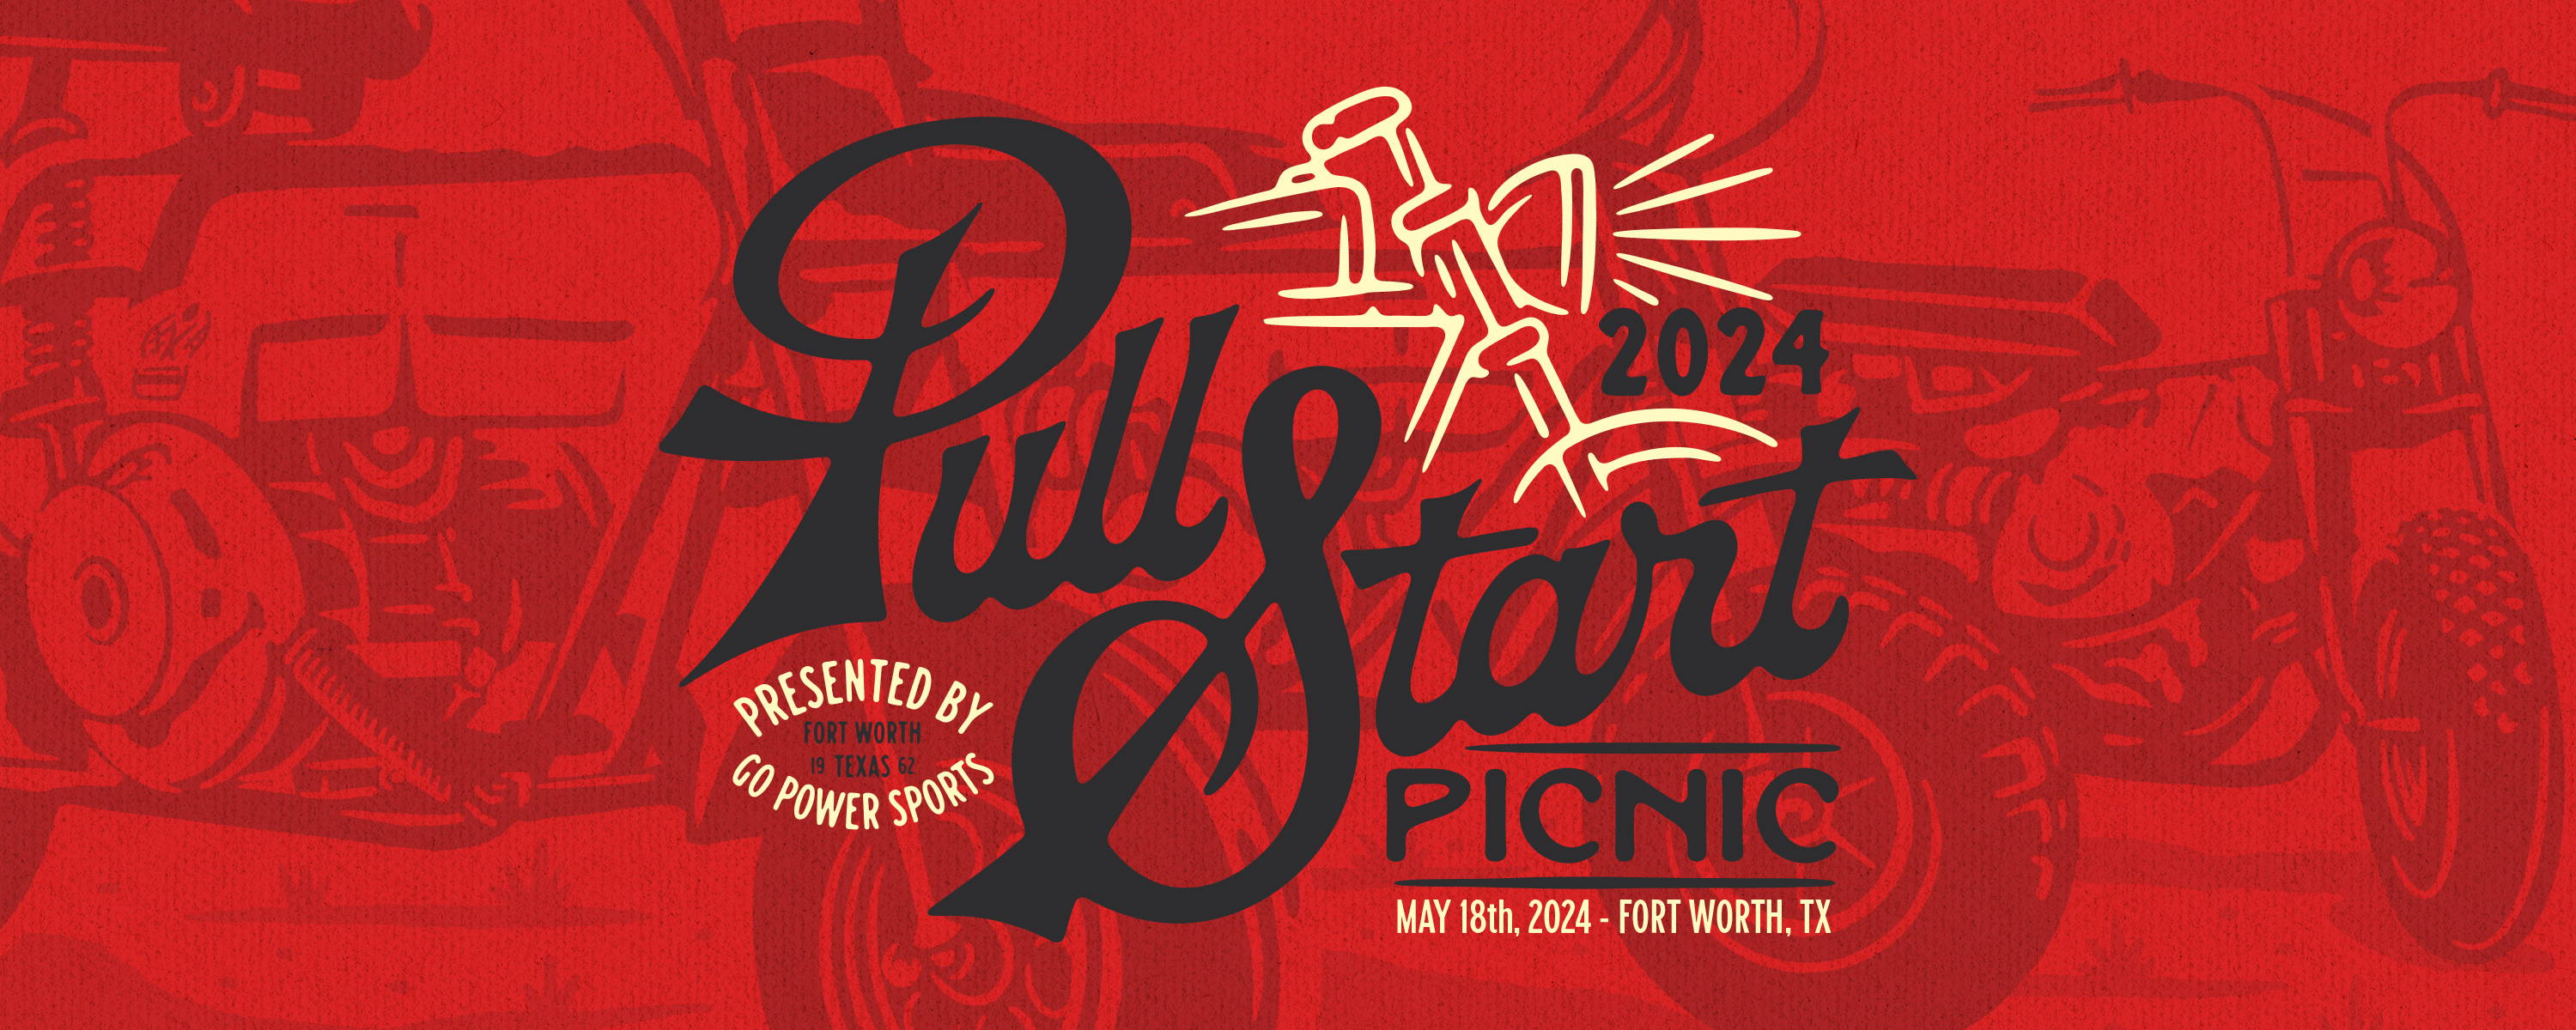 Pull Start Picnic Minibike Show 2024 presented by GoPowerSports